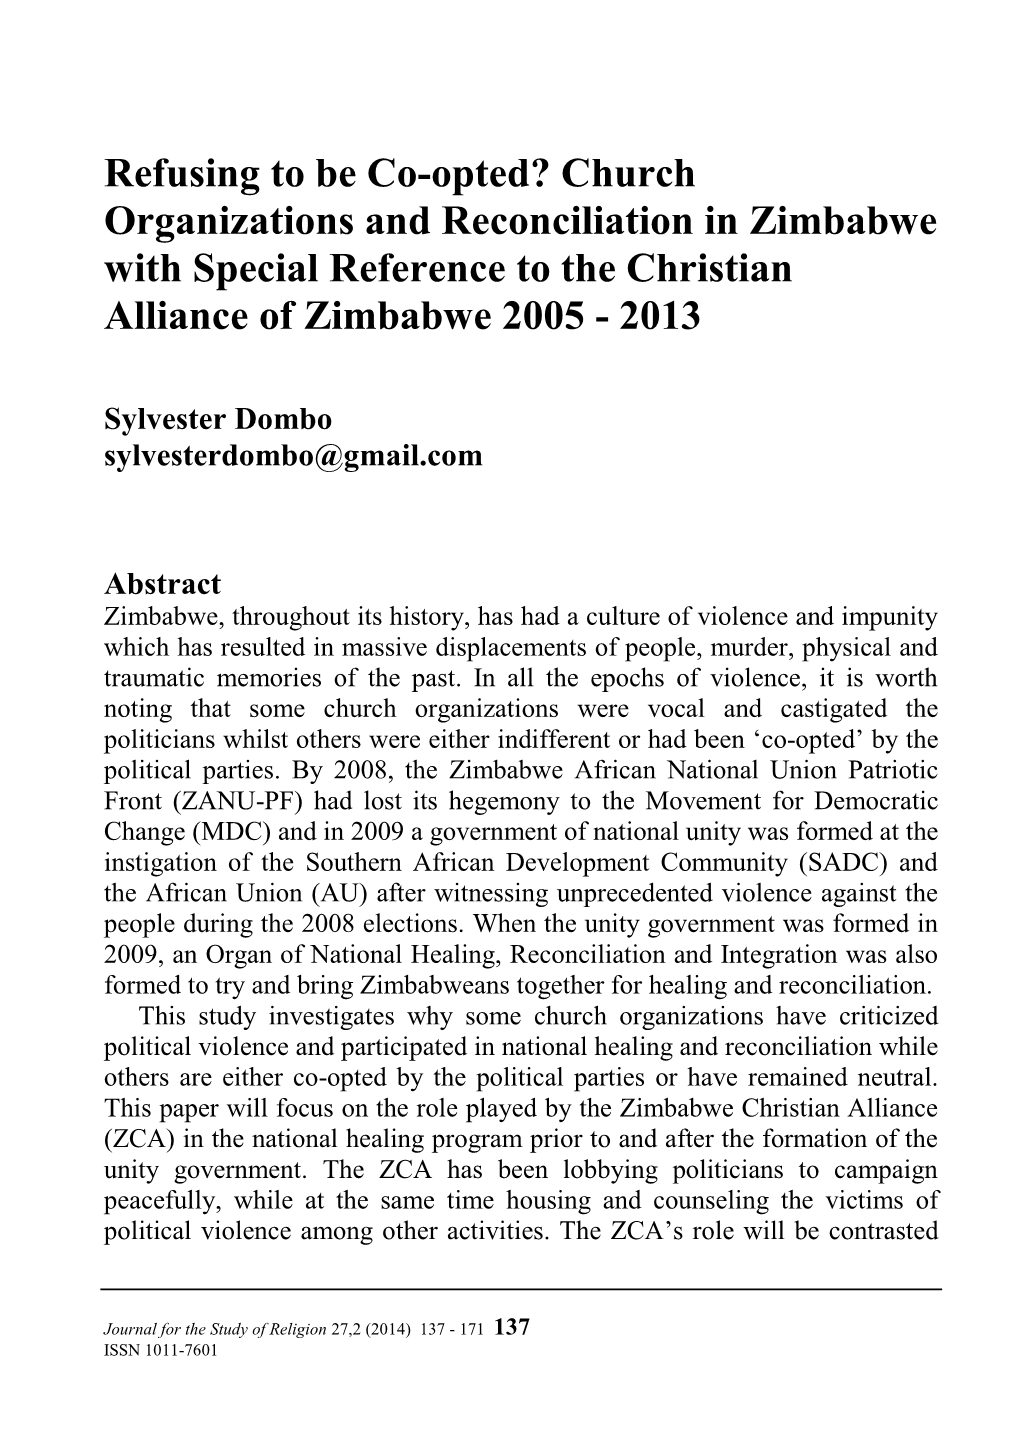 Refusing to Be Co-Opted? Church Organizations and Reconciliation in Zimbabwe with Special Reference to the Christian Alliance of Zimbabwe 2005 - 2013